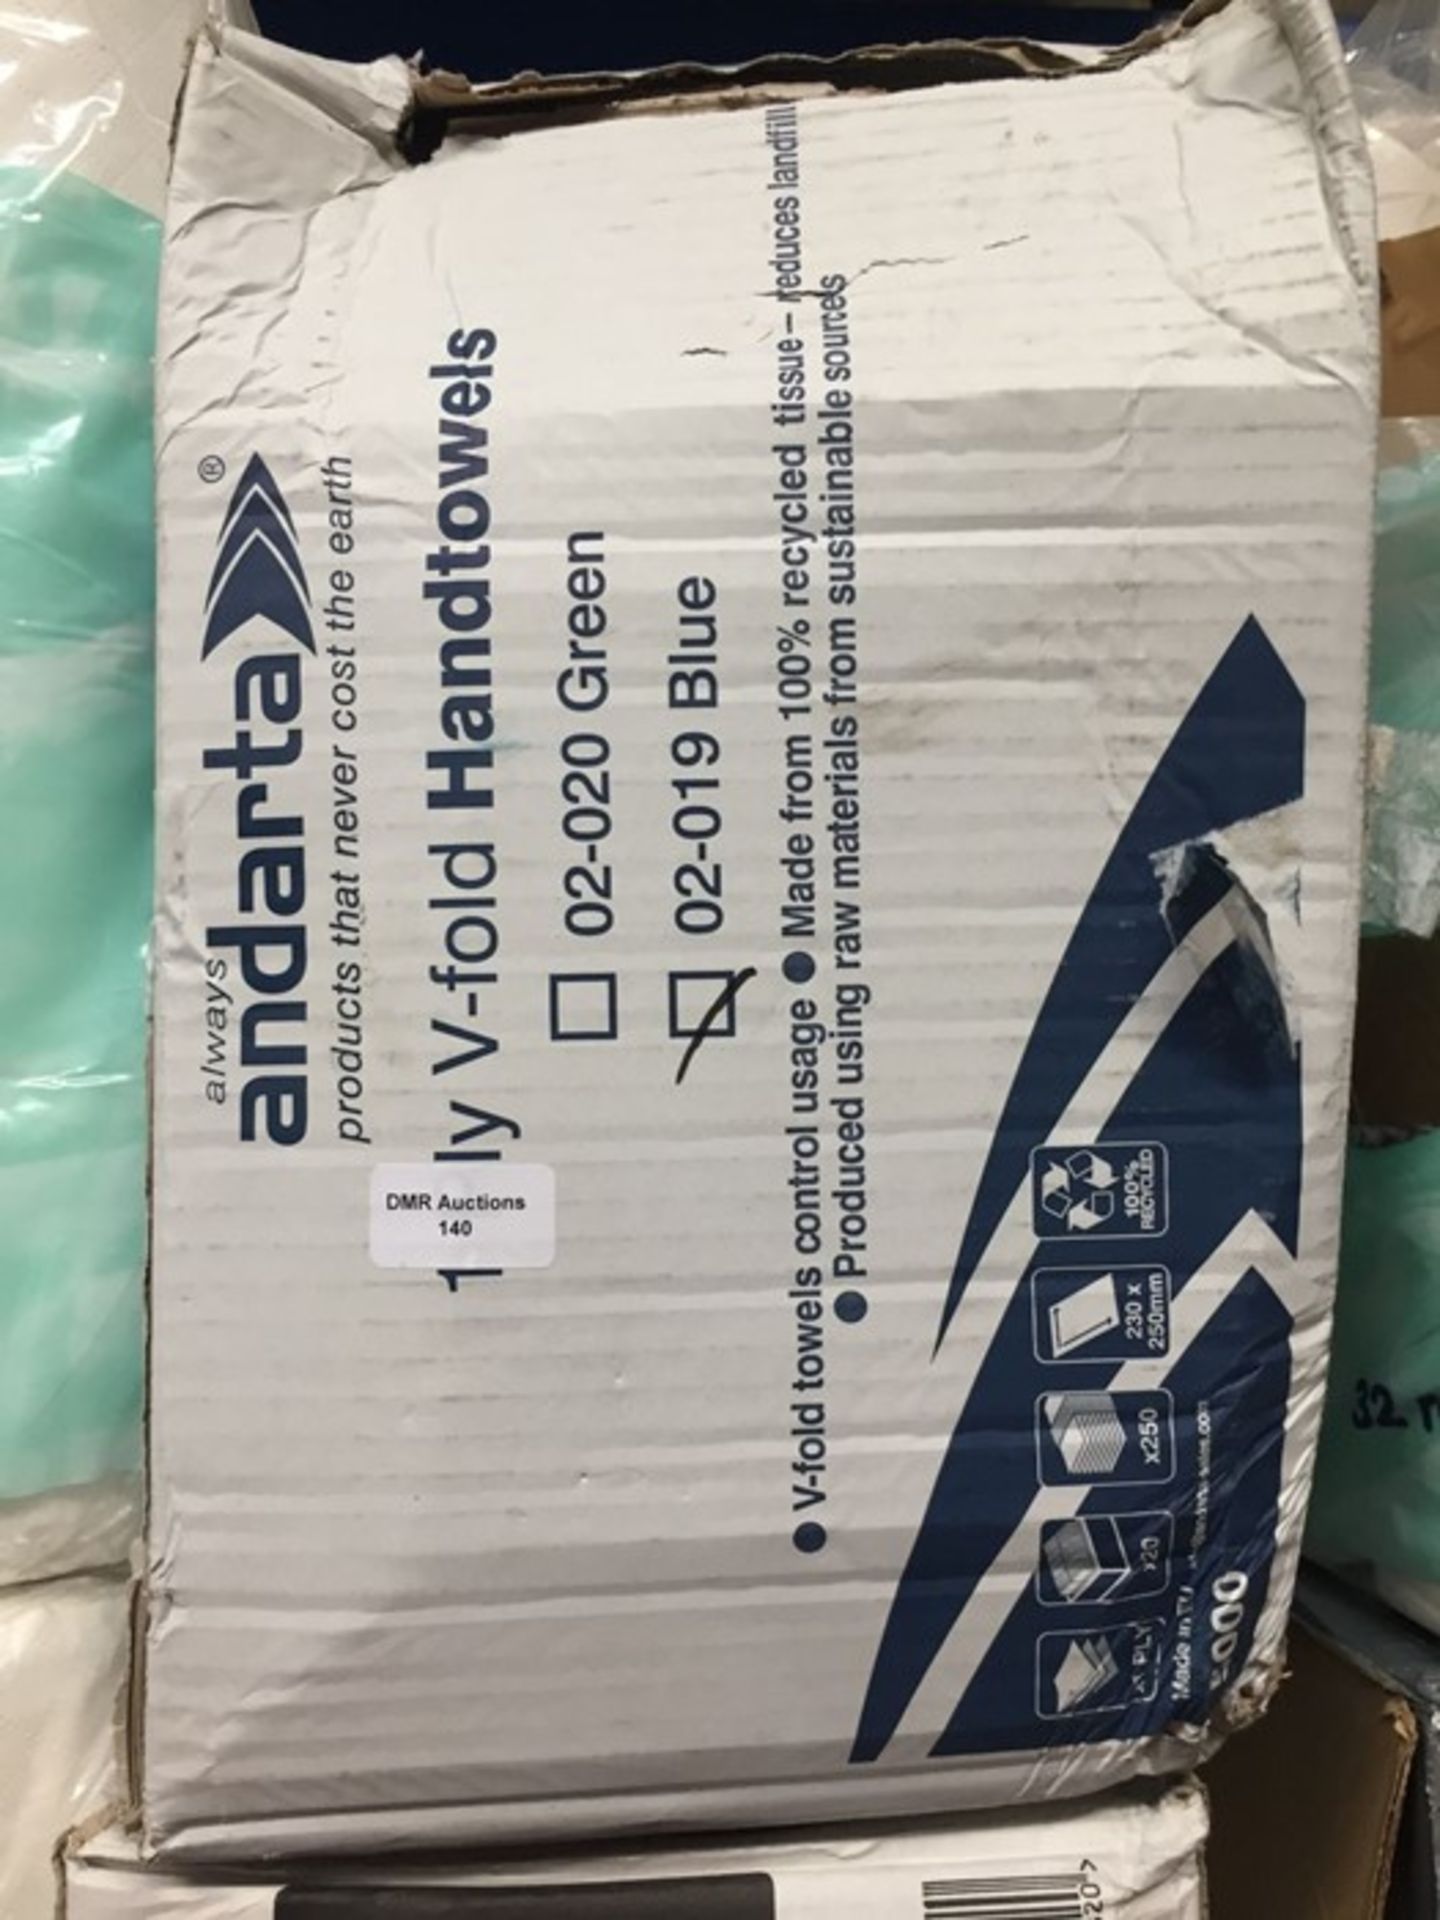 1 LOT TO CONTAIN A BOX OF ANDARTA V FOLD HAND TOWELS IN BLUE - L3